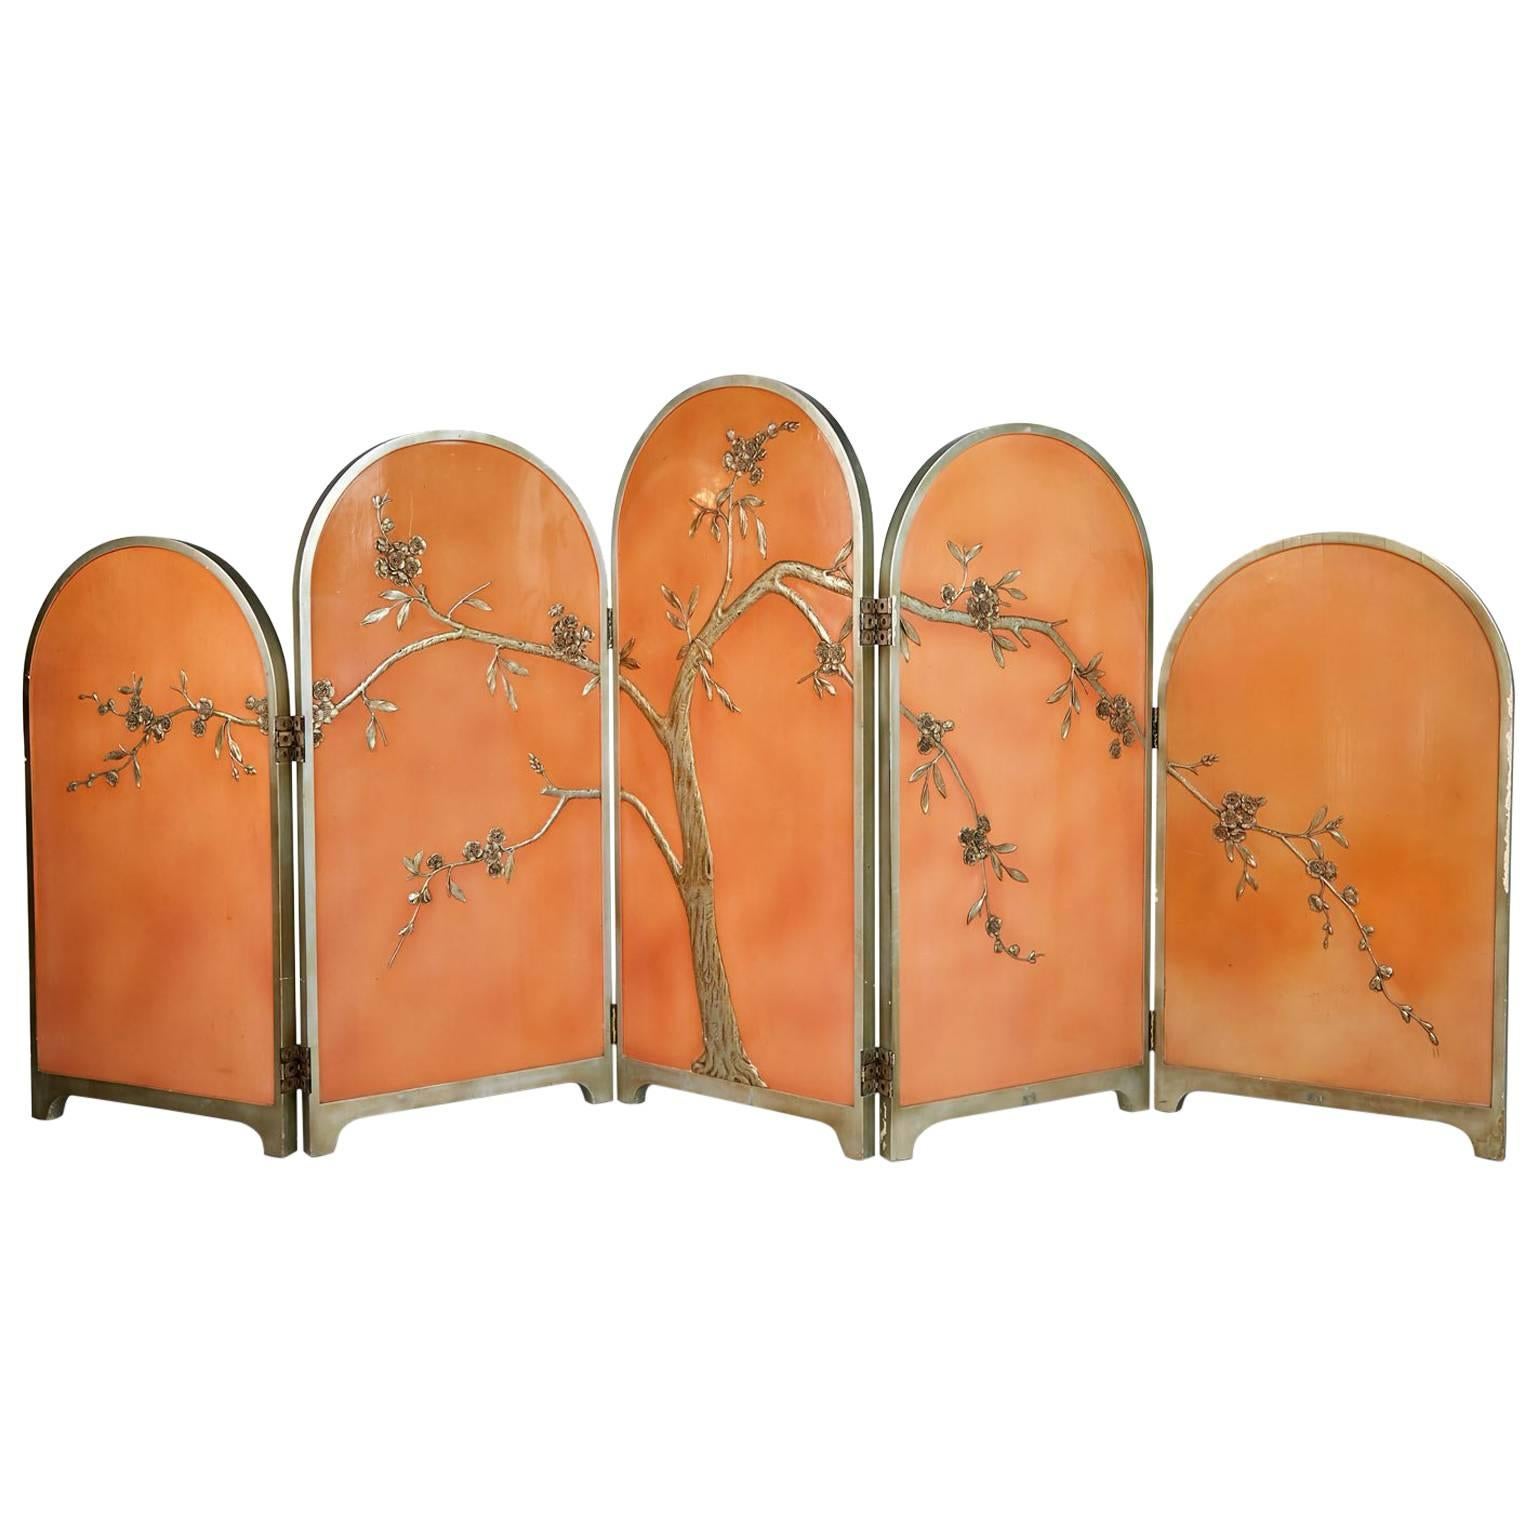 Peach Art Deco Carved Relief Floral Chinoiserie Folding Screen, circa 1920